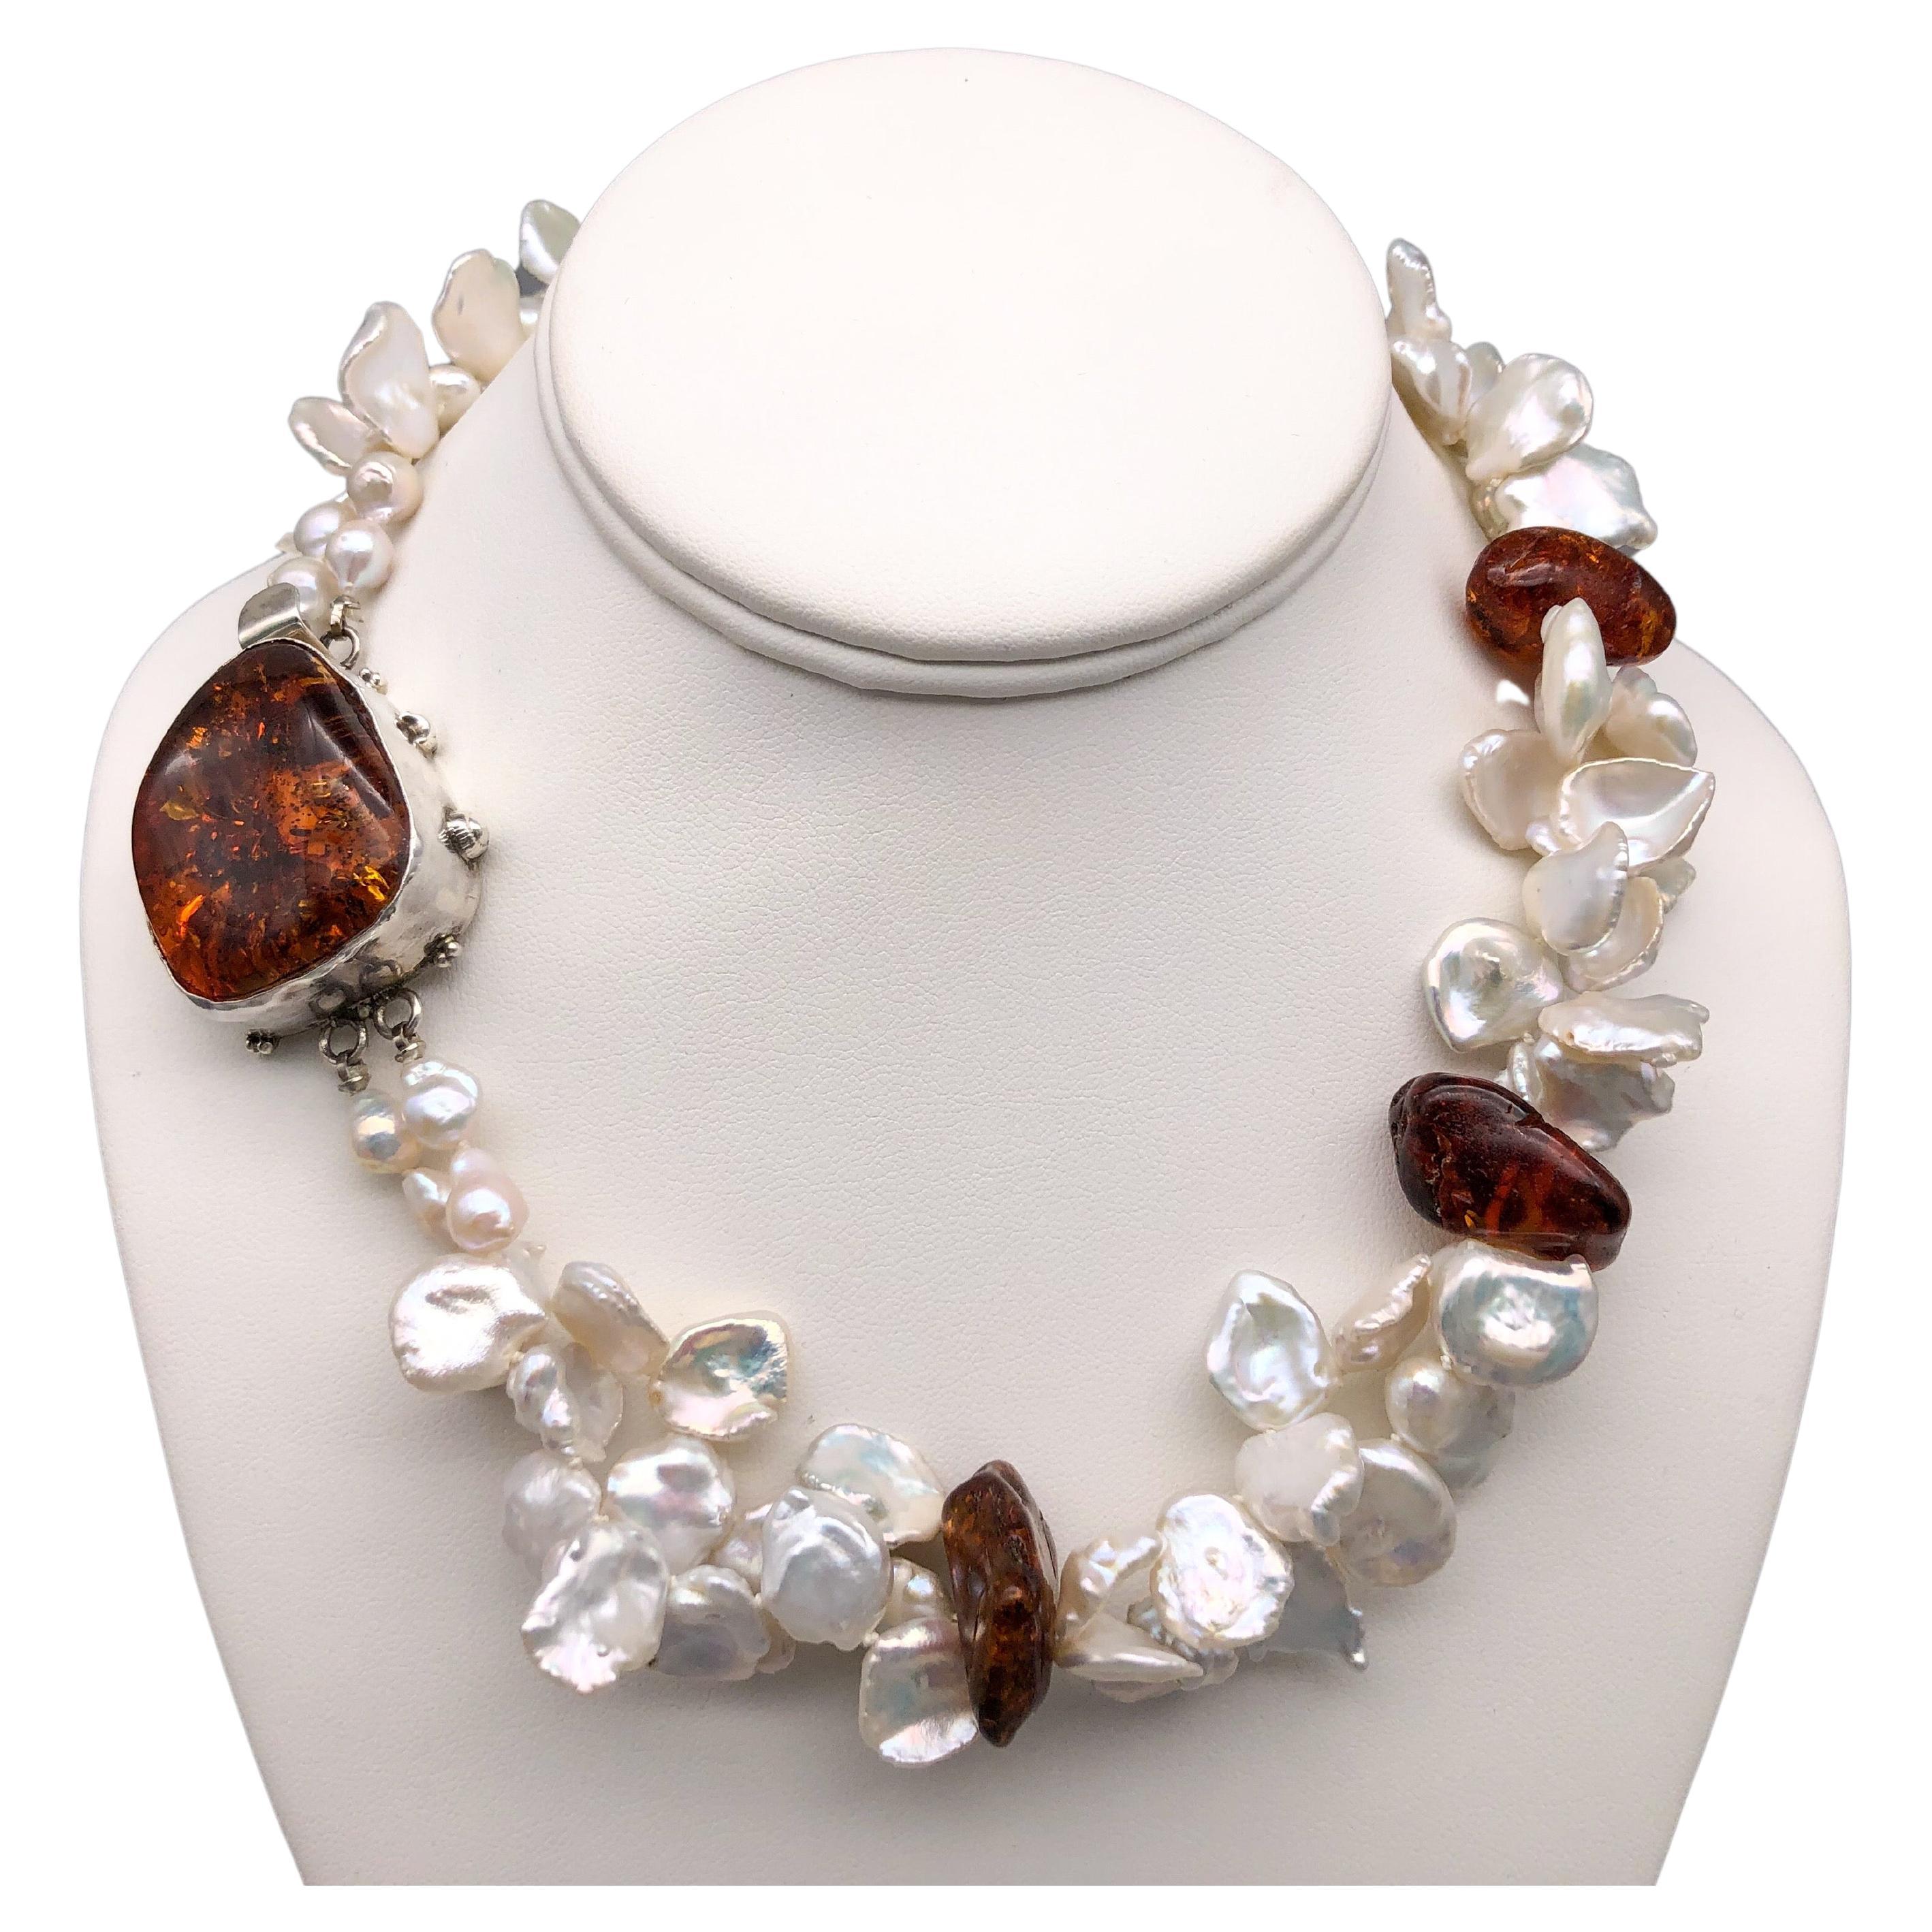 A.Jeschel Splendid Keshi Pearls and Amber Necklace. For Sale